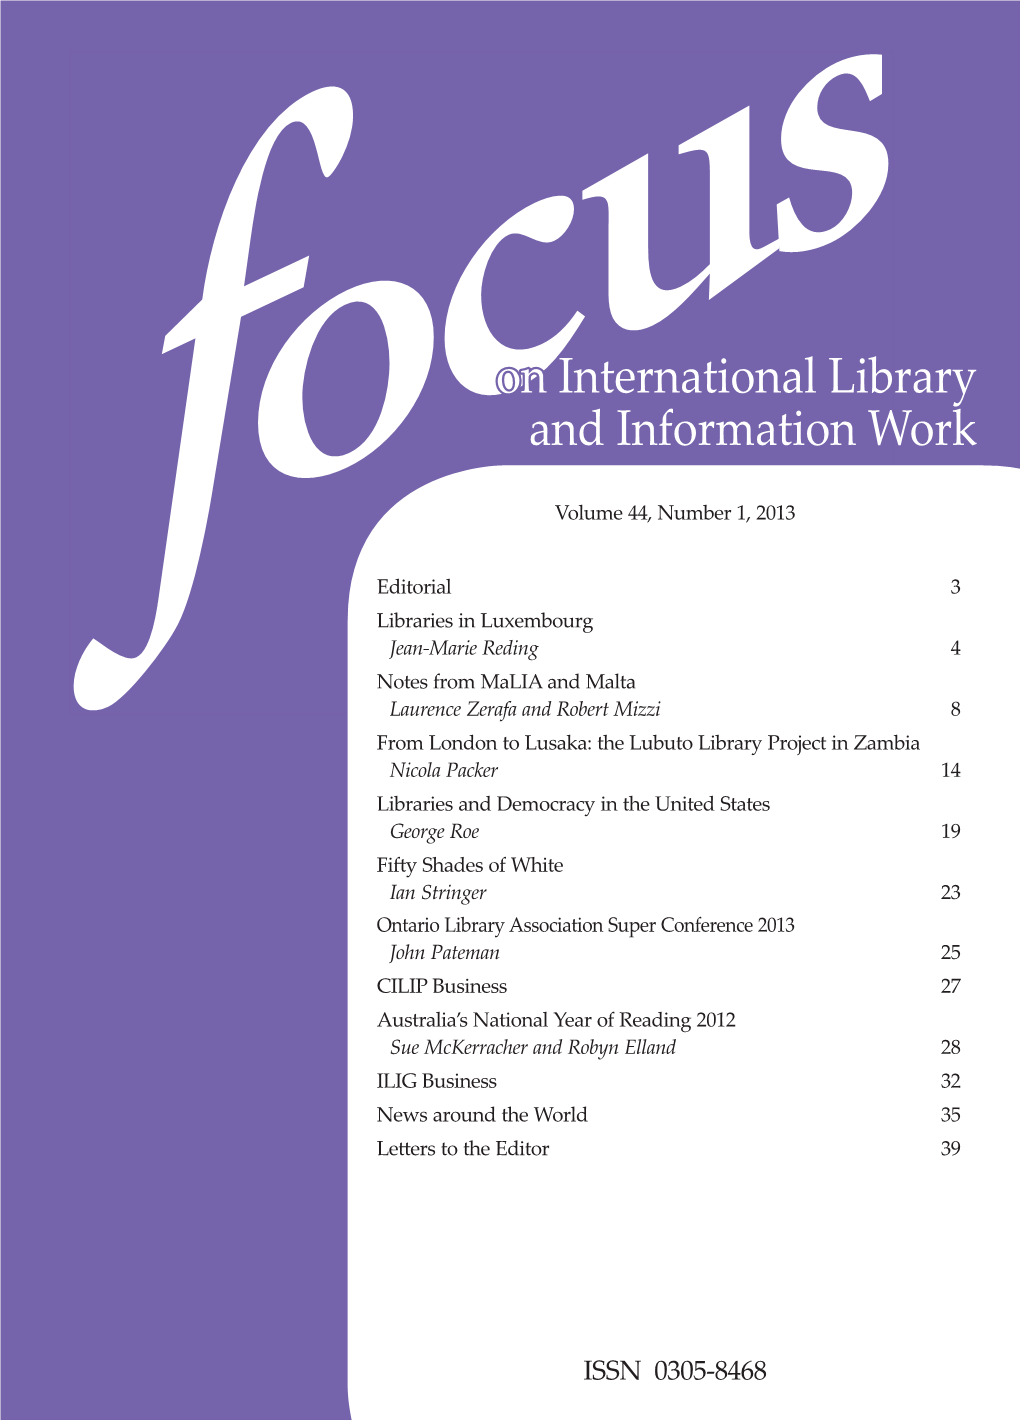 On International Library and Information Work